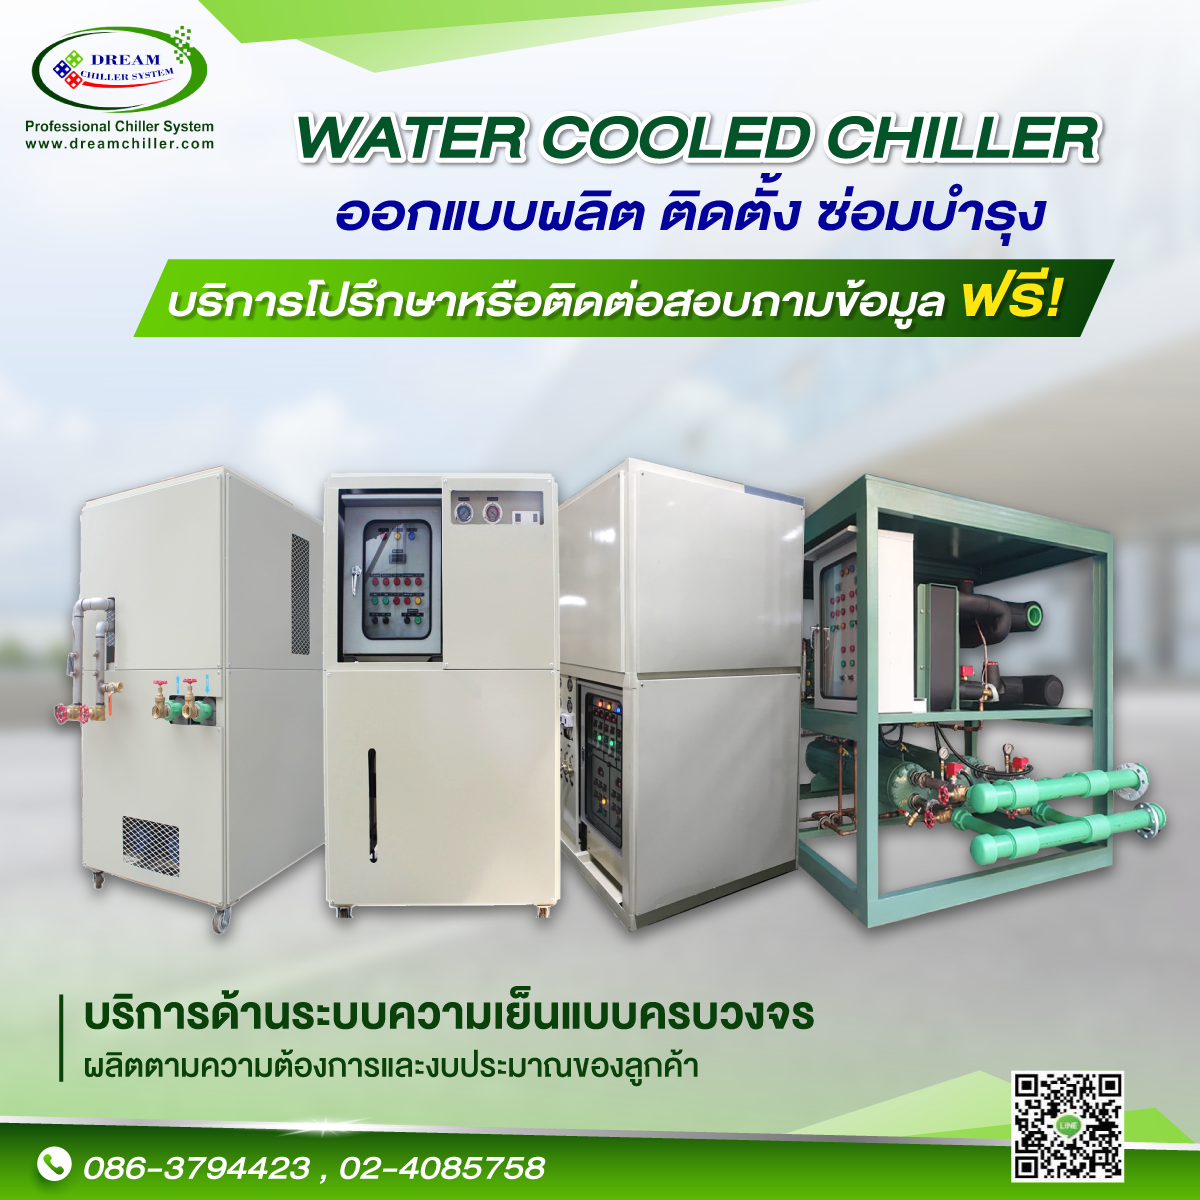 WATER  COOLED  CHILLER  40-160 Tons